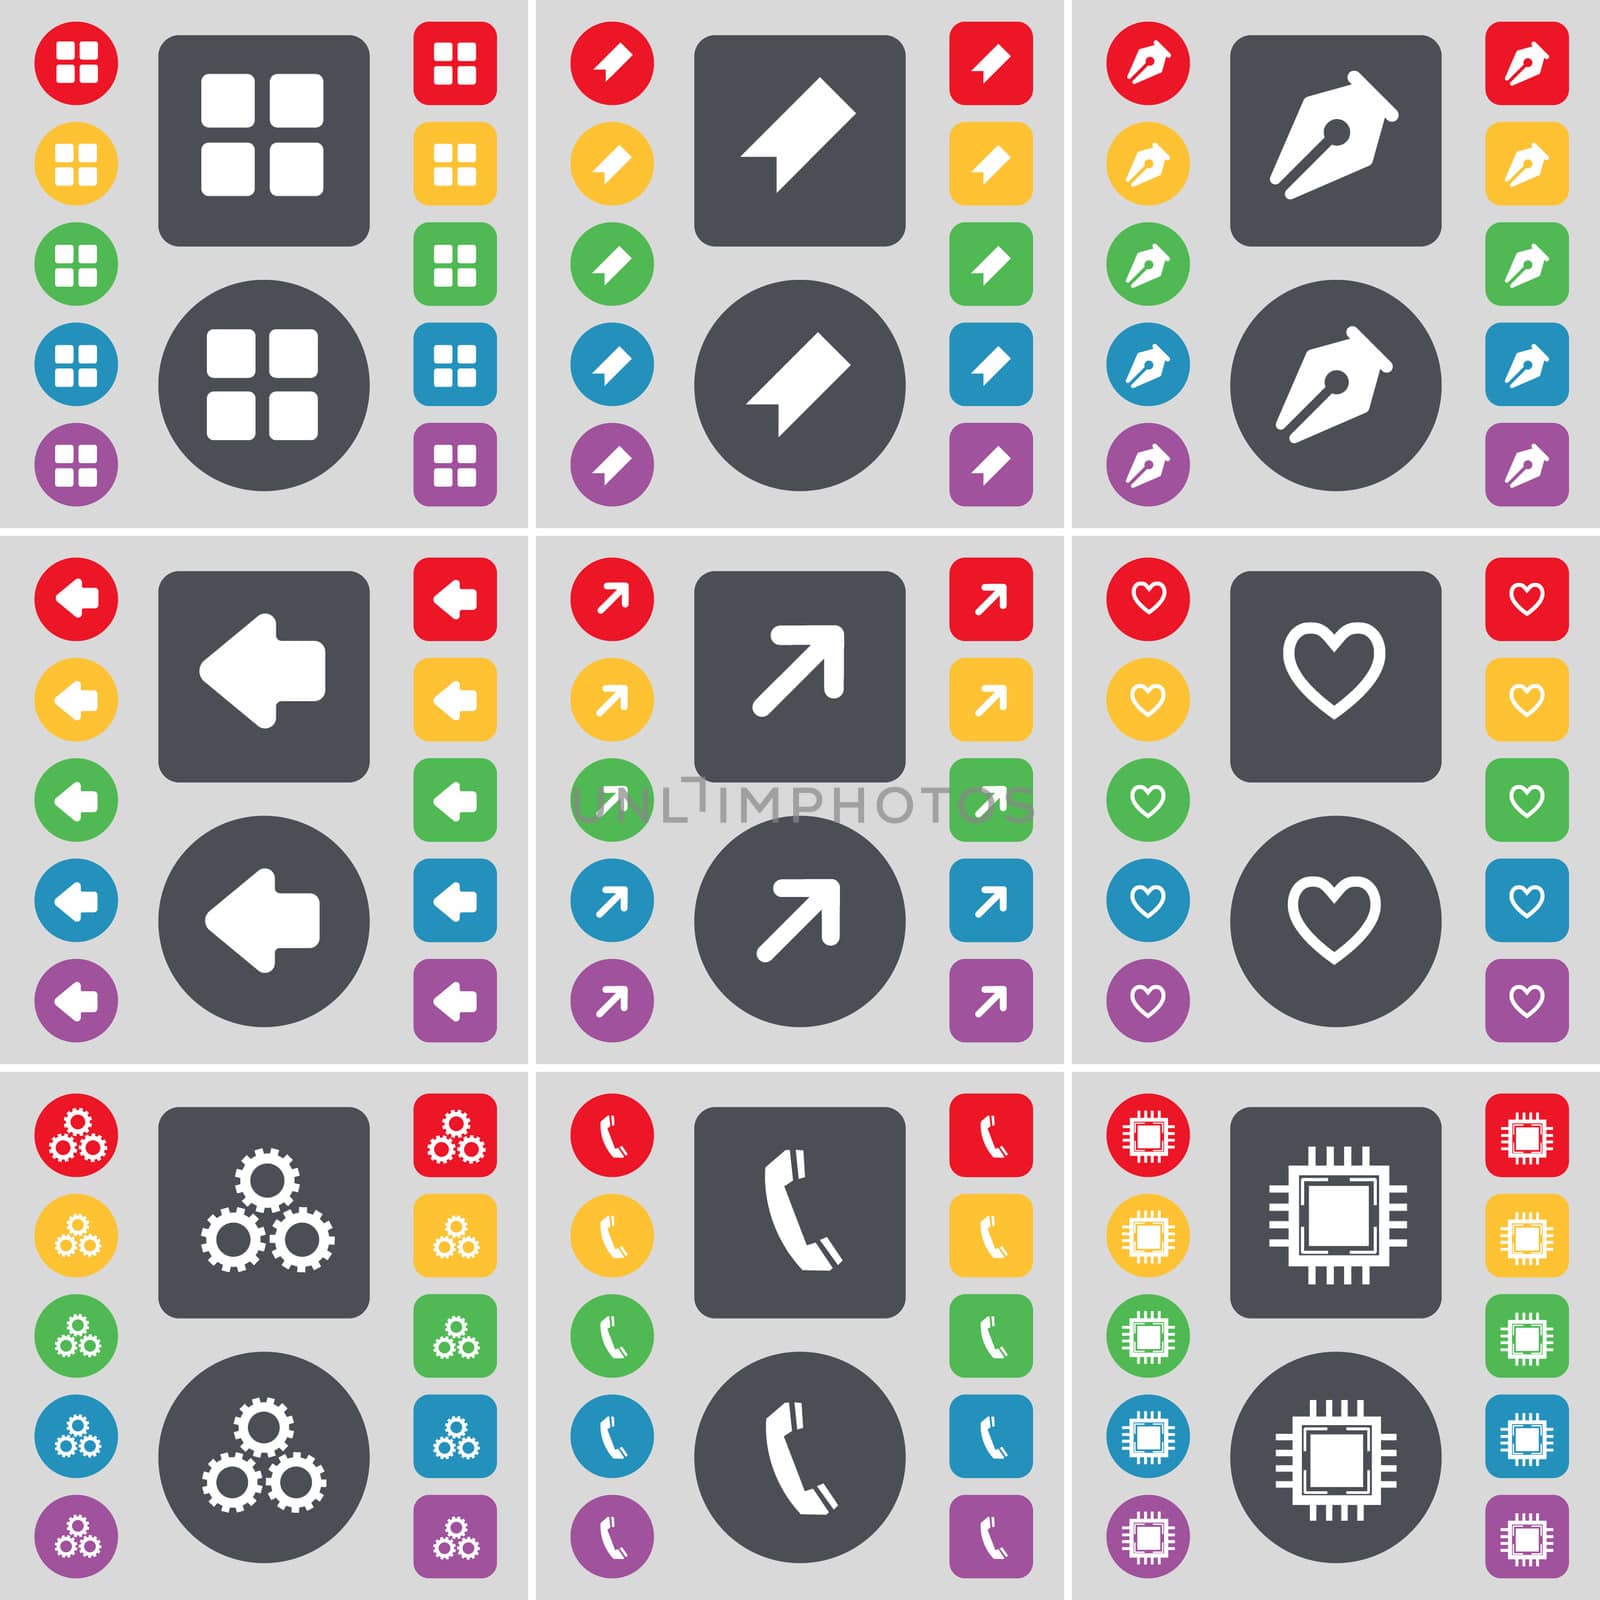 Apps, Marker, Ink pen, Arrow left, Full screen, Heart, Gear, Receiver, Processor icon symbol. A large set of flat, colored buttons for your design. illustration